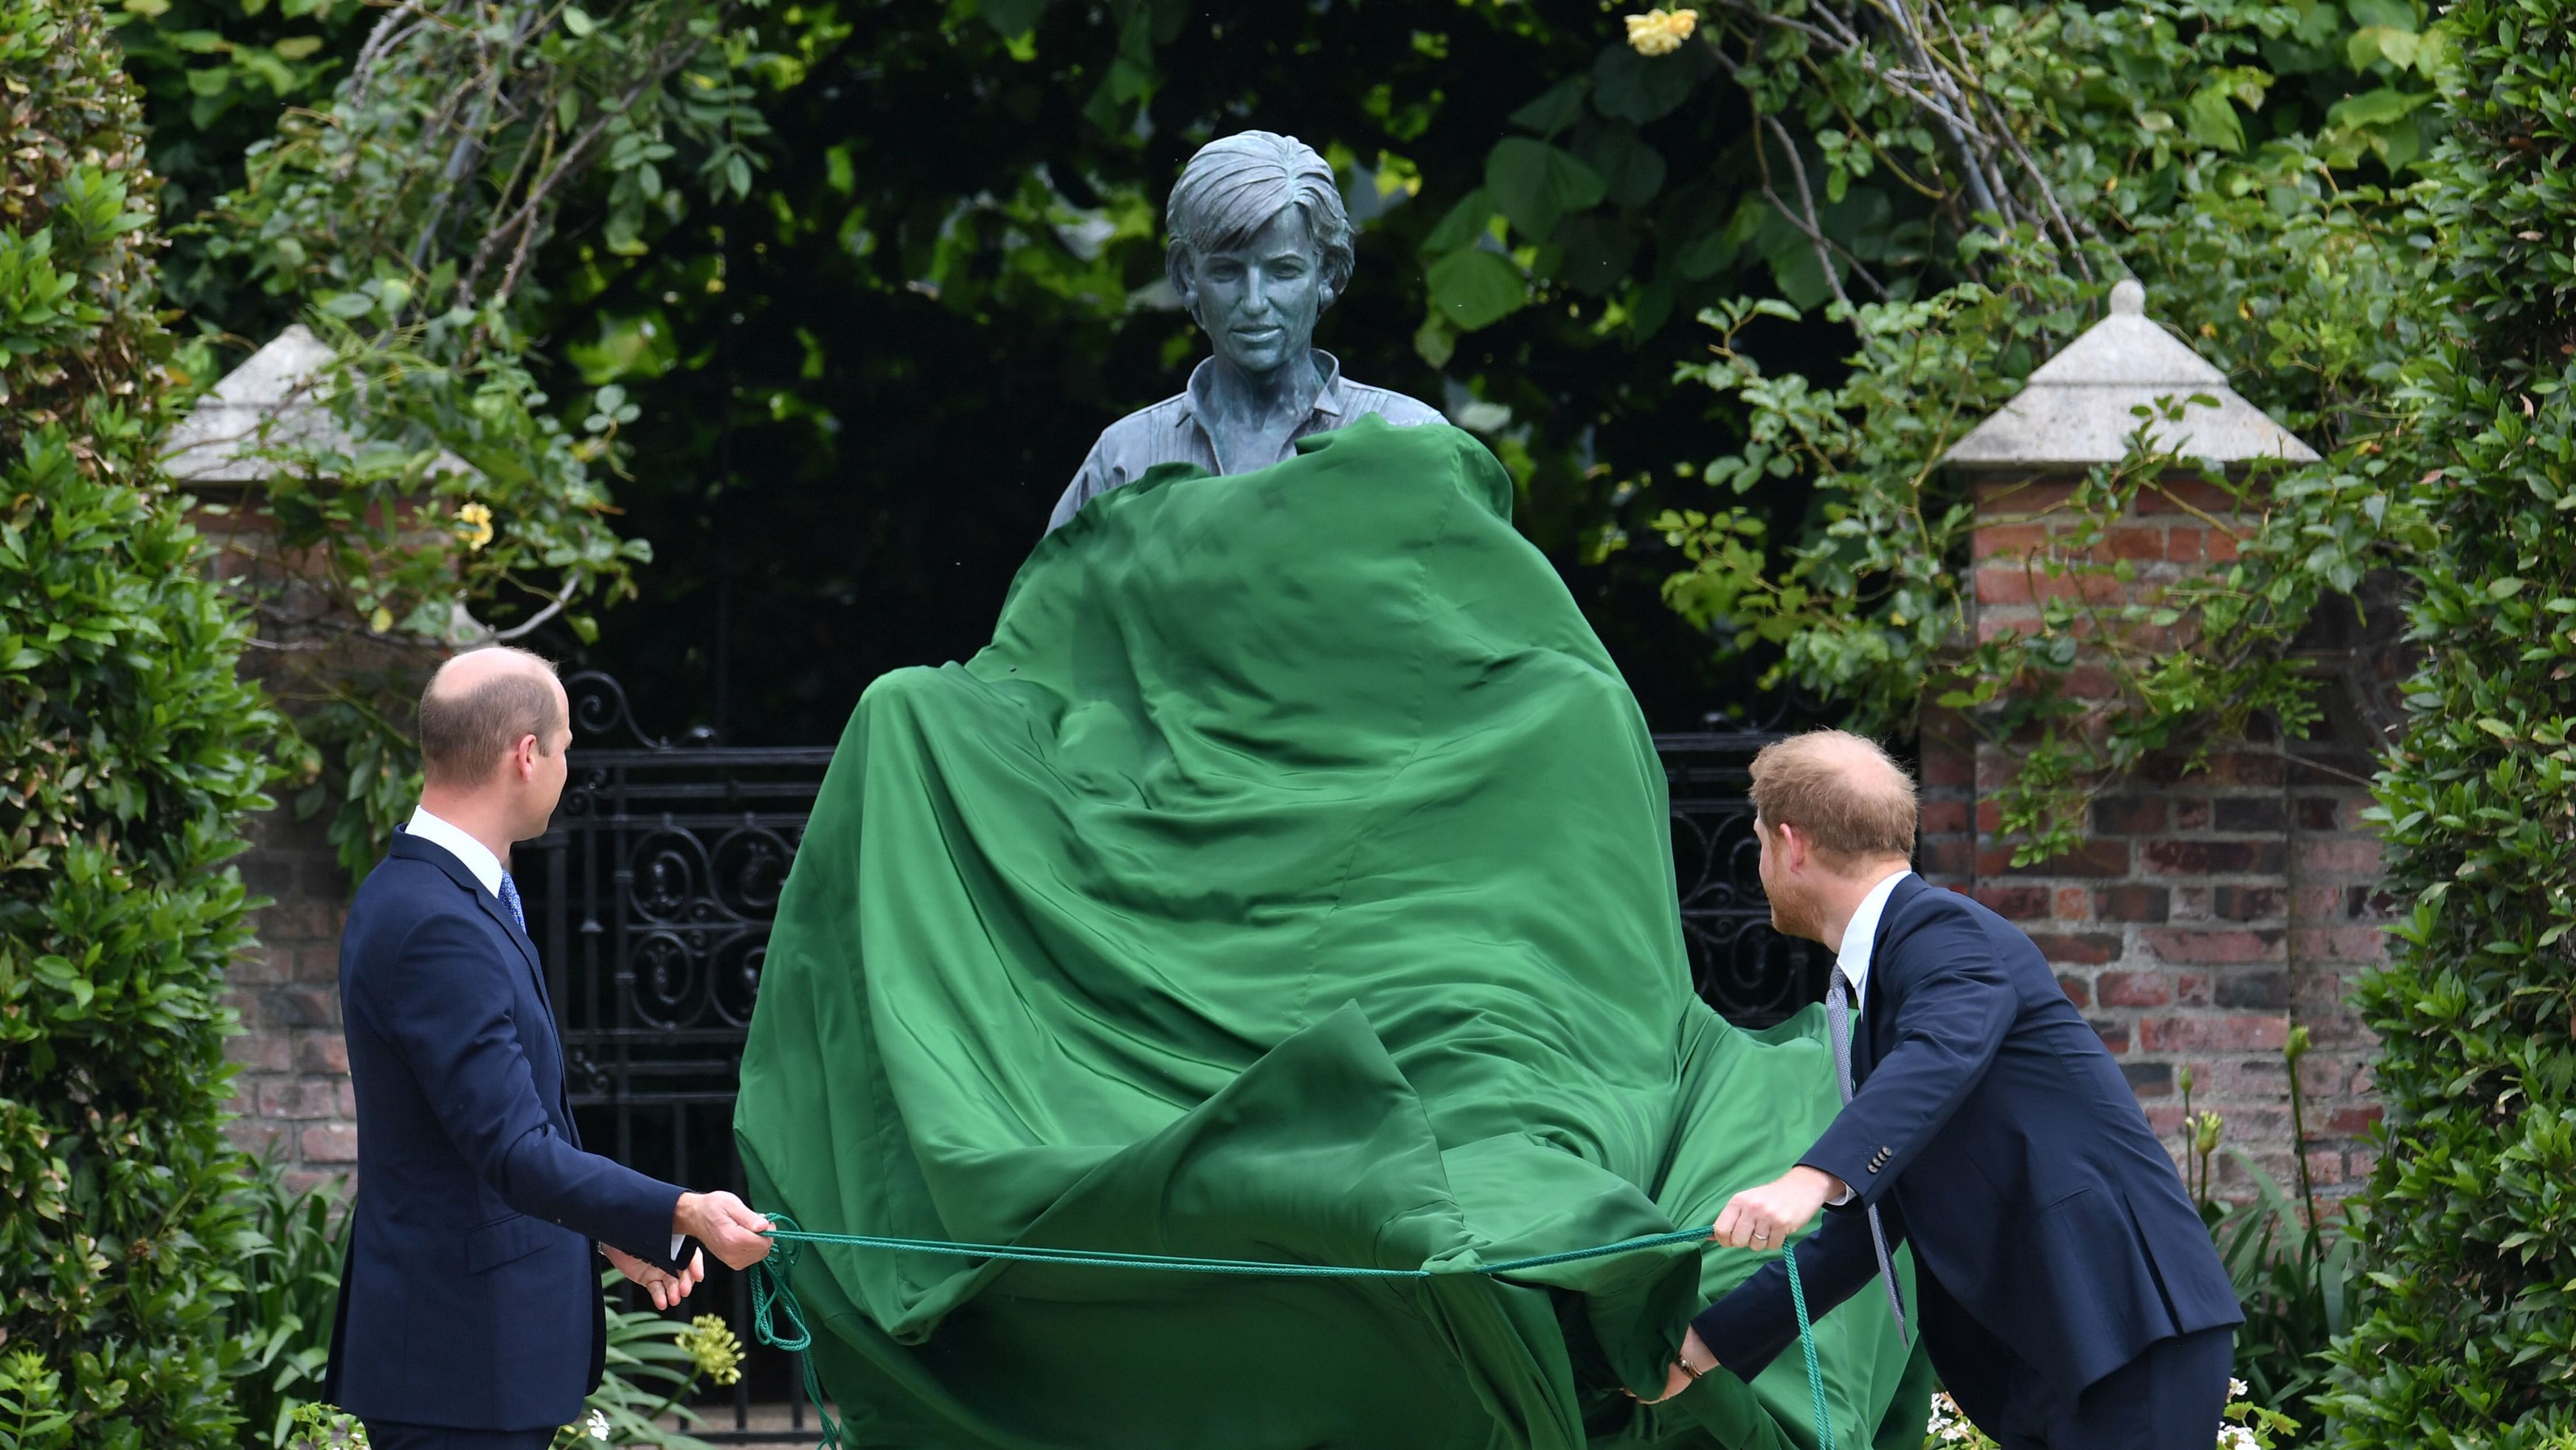 William and Harry unveil a statue they commissioned of their mother on what would have been her 60th birthday in July 2021.